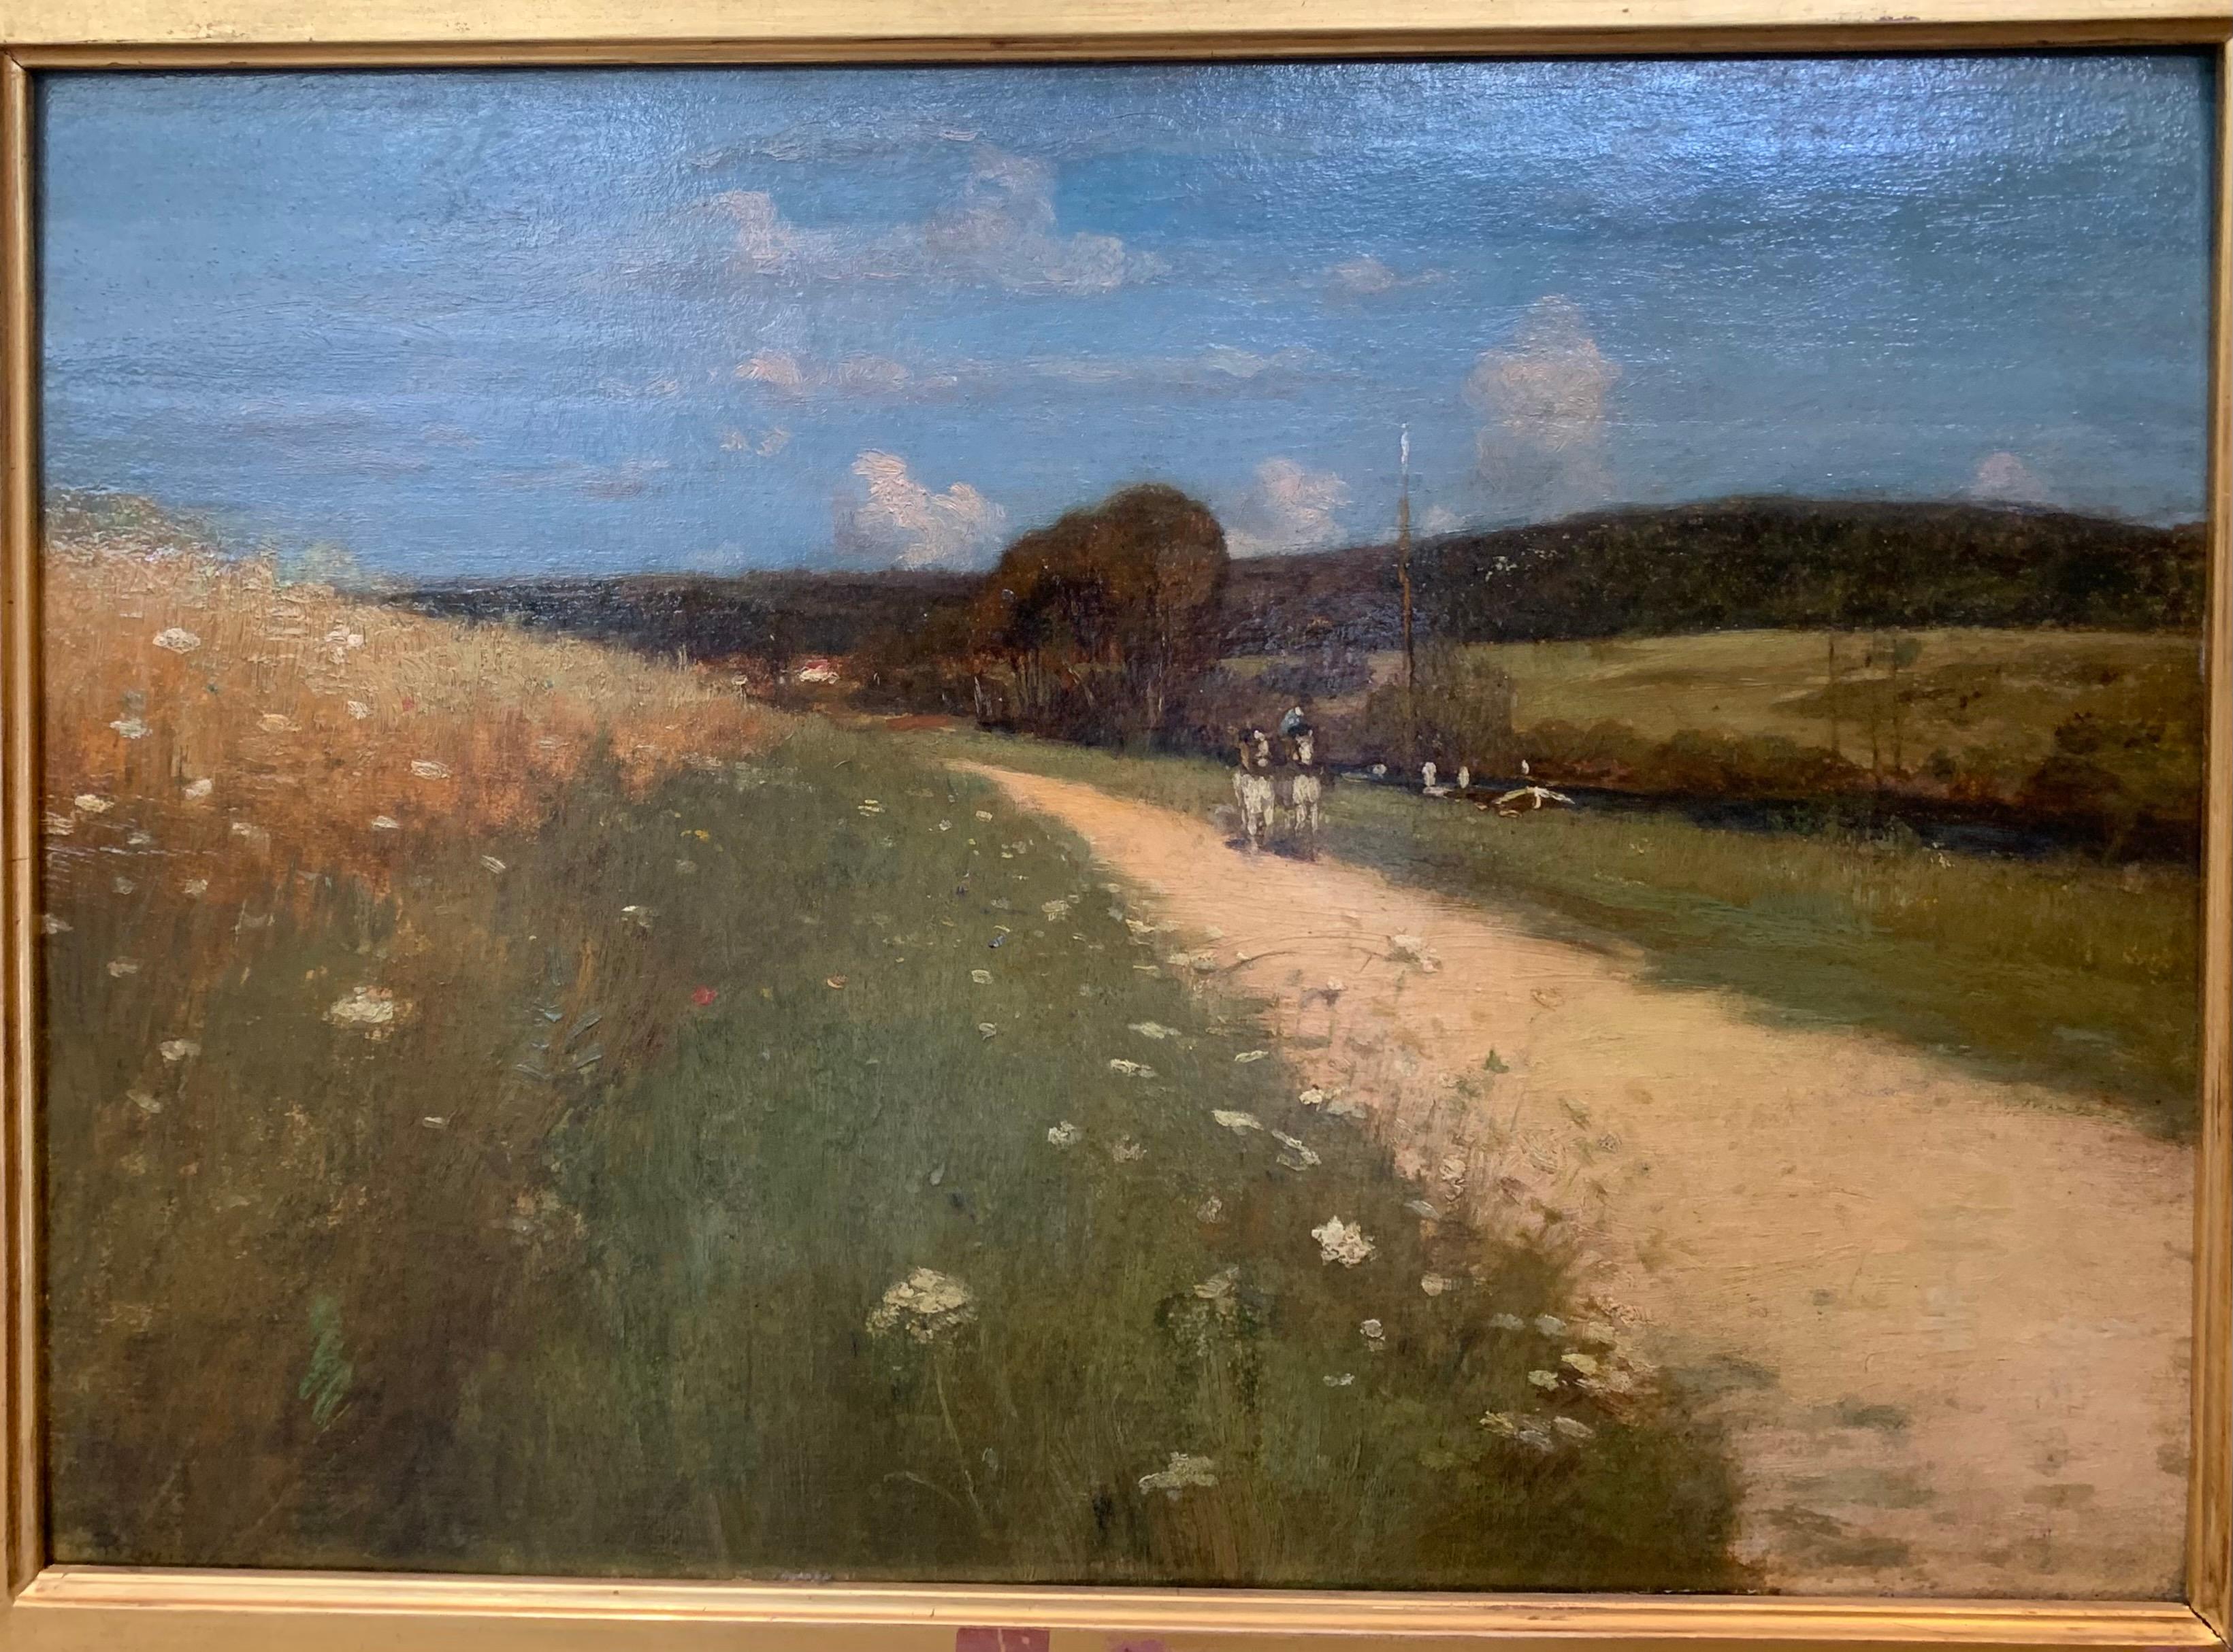 A Fine Landscape representing a field of poppy.

Signed bottom left Auguste BOULARD (1852-1927 )

Dimensions: 38 x 50.5 cm. (14.961 x 19.685 in.)

Dimensions with frame: 56 x 71 x 1 cm. (22.047 x 27.953 x 0.394 in.)

Within its original